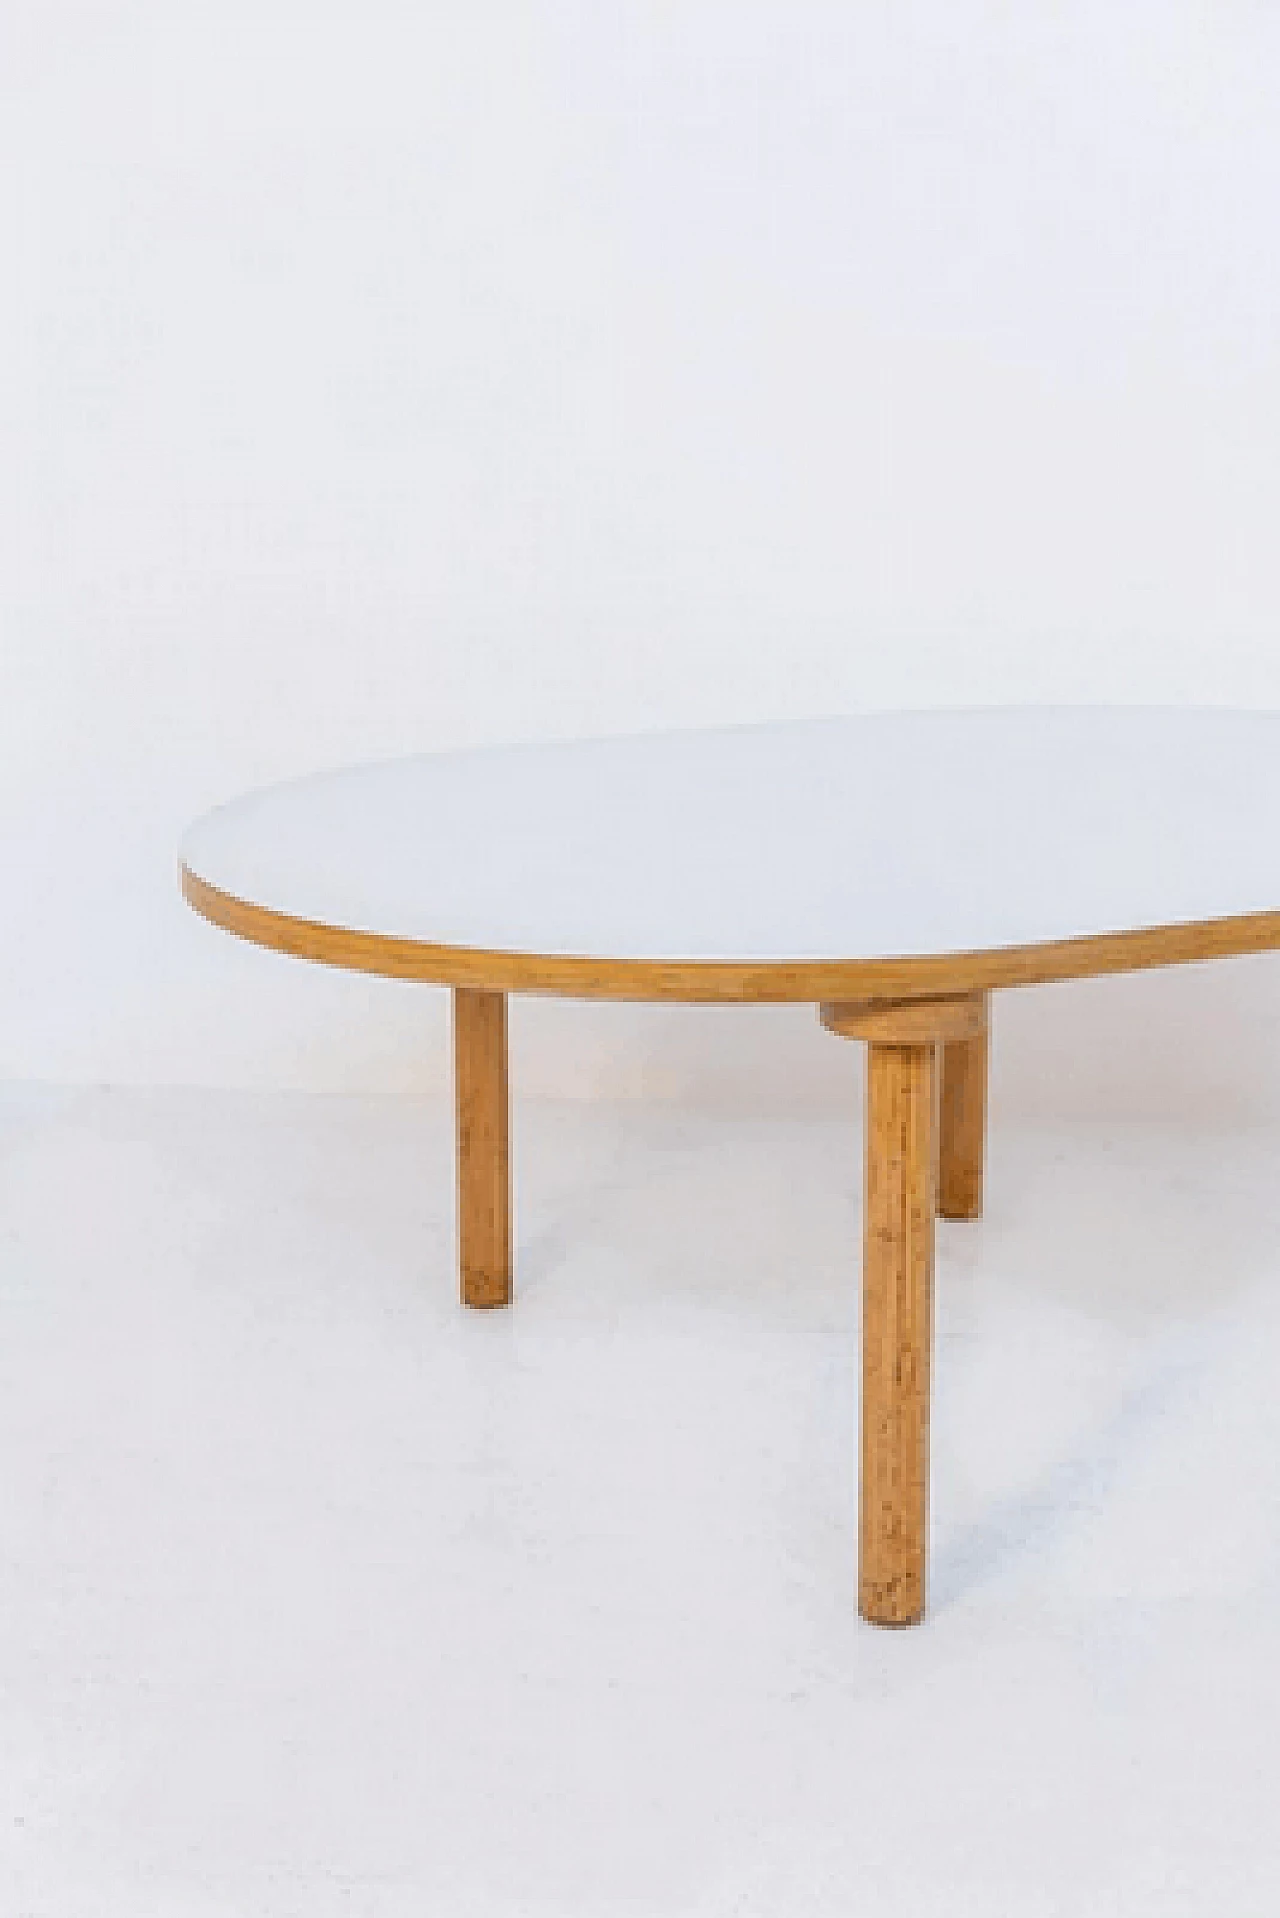 Table by Enzo Mari for Driade, 1970s 1473391